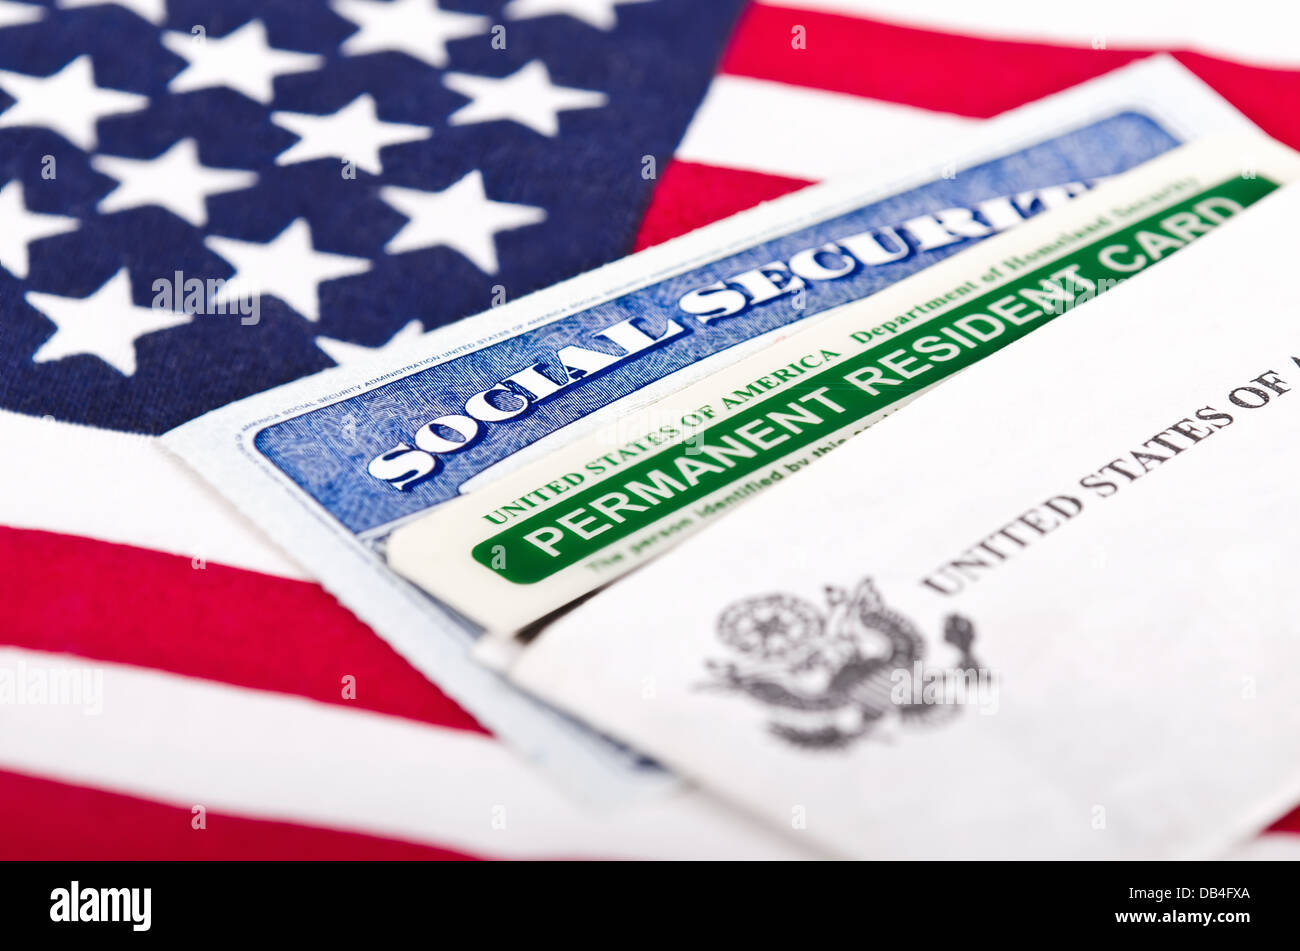 United States of America social security and green card with US flag on the background. Immigration concept. Stock Photo